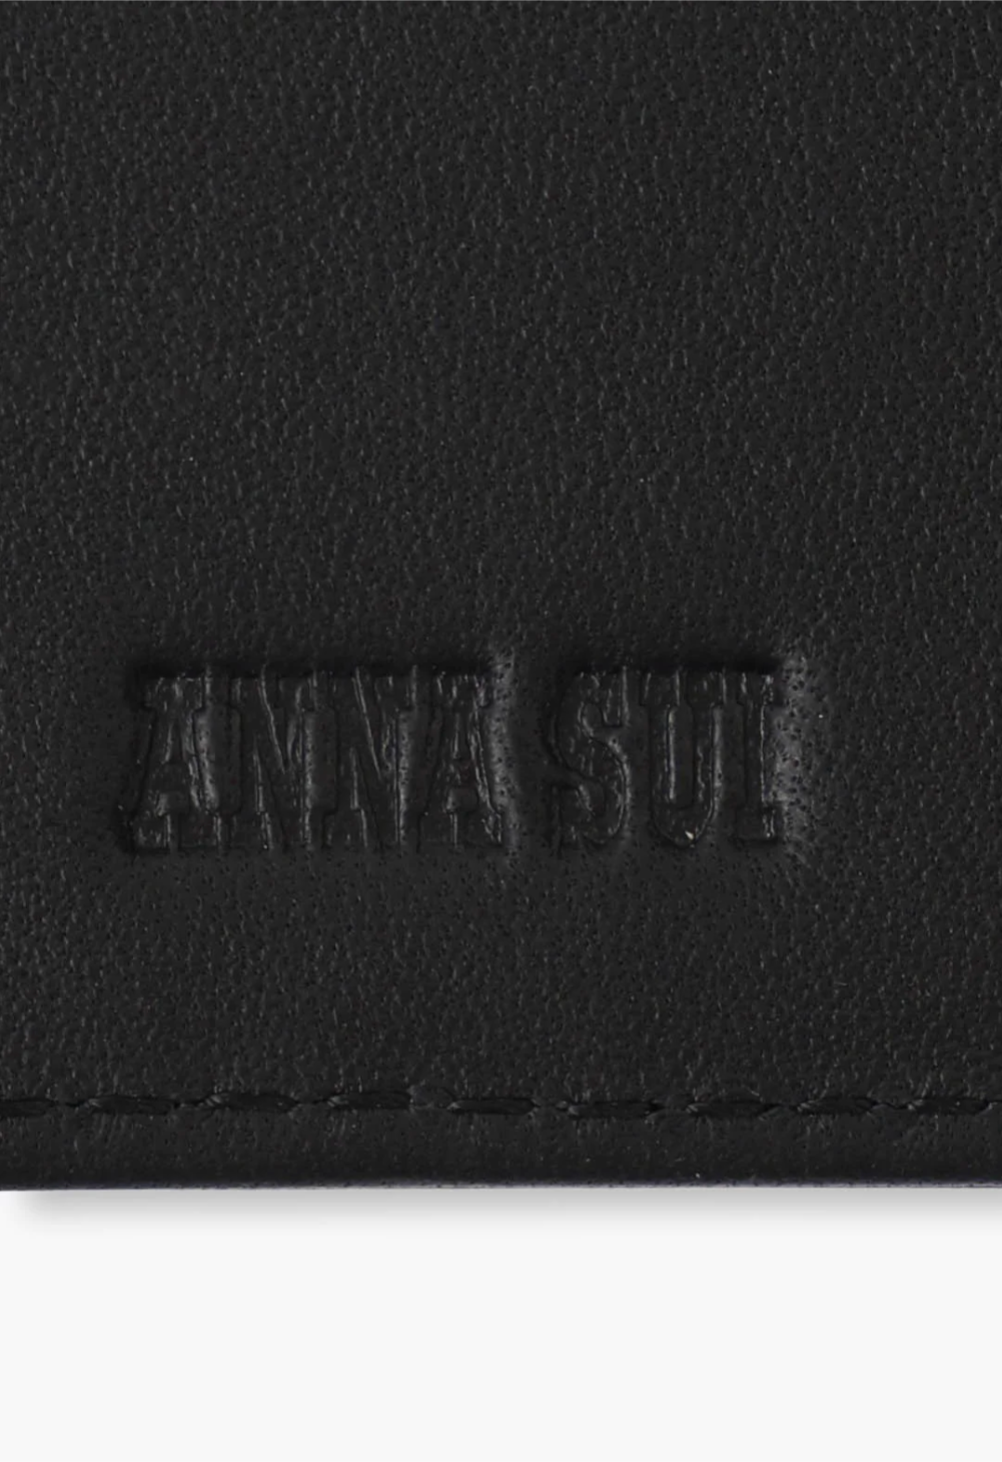 The Roger Wallet wine, detail of the Anna Sui Raised logo and large wine stiches